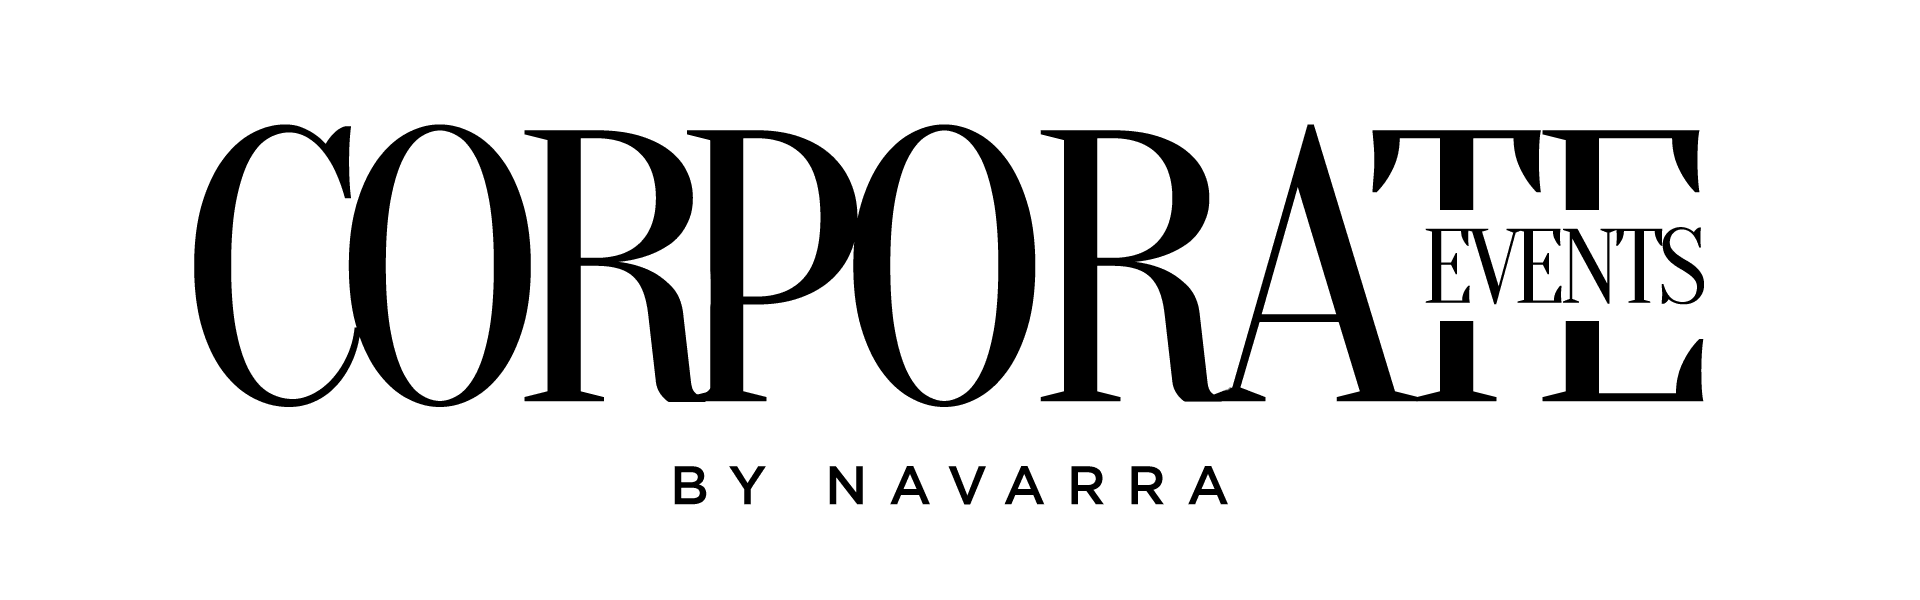 Corporate Events By Navarra